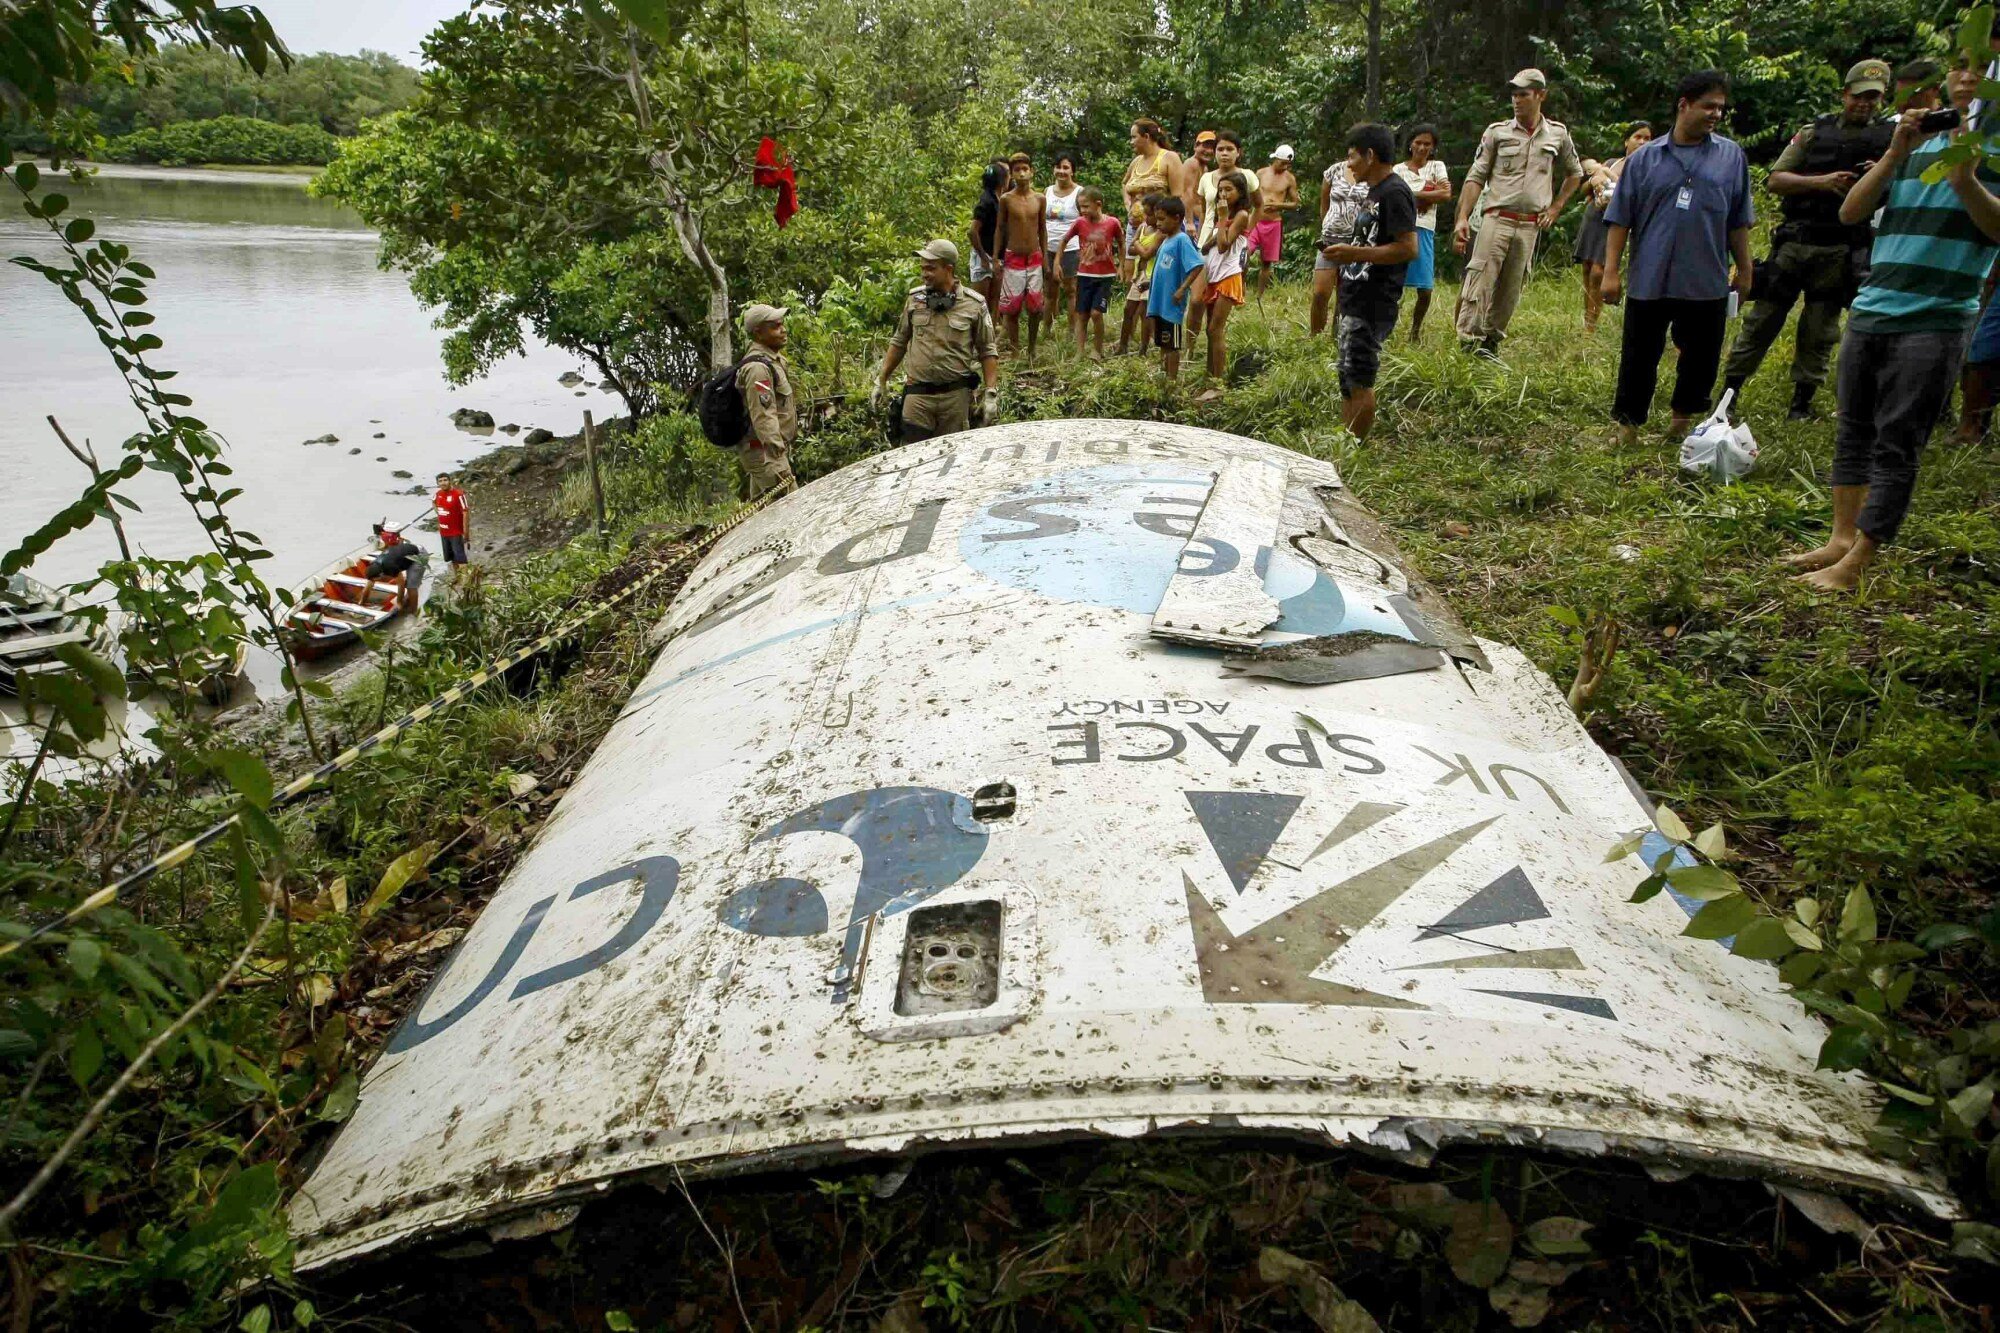 A large, white piece of debris from a spacecraft rests in the grass on the bank of a river in Brazil. The piece of metal has the words "UK space agency" printed on it. A group of people stand behind the debris.